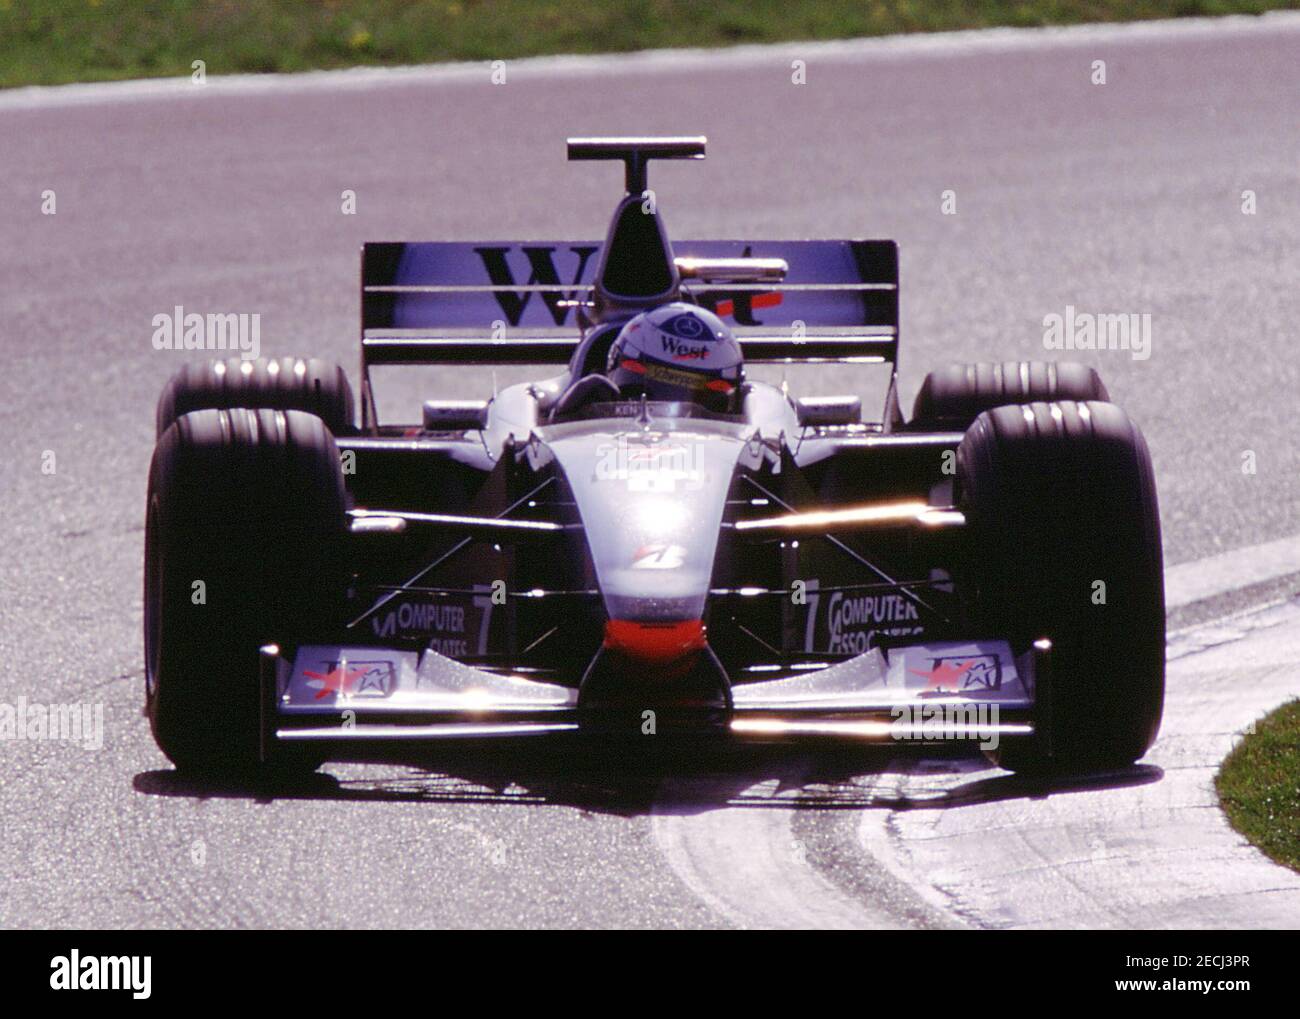 Mclaren F1 1998 High Resolution Stock Photography And Images Alamy